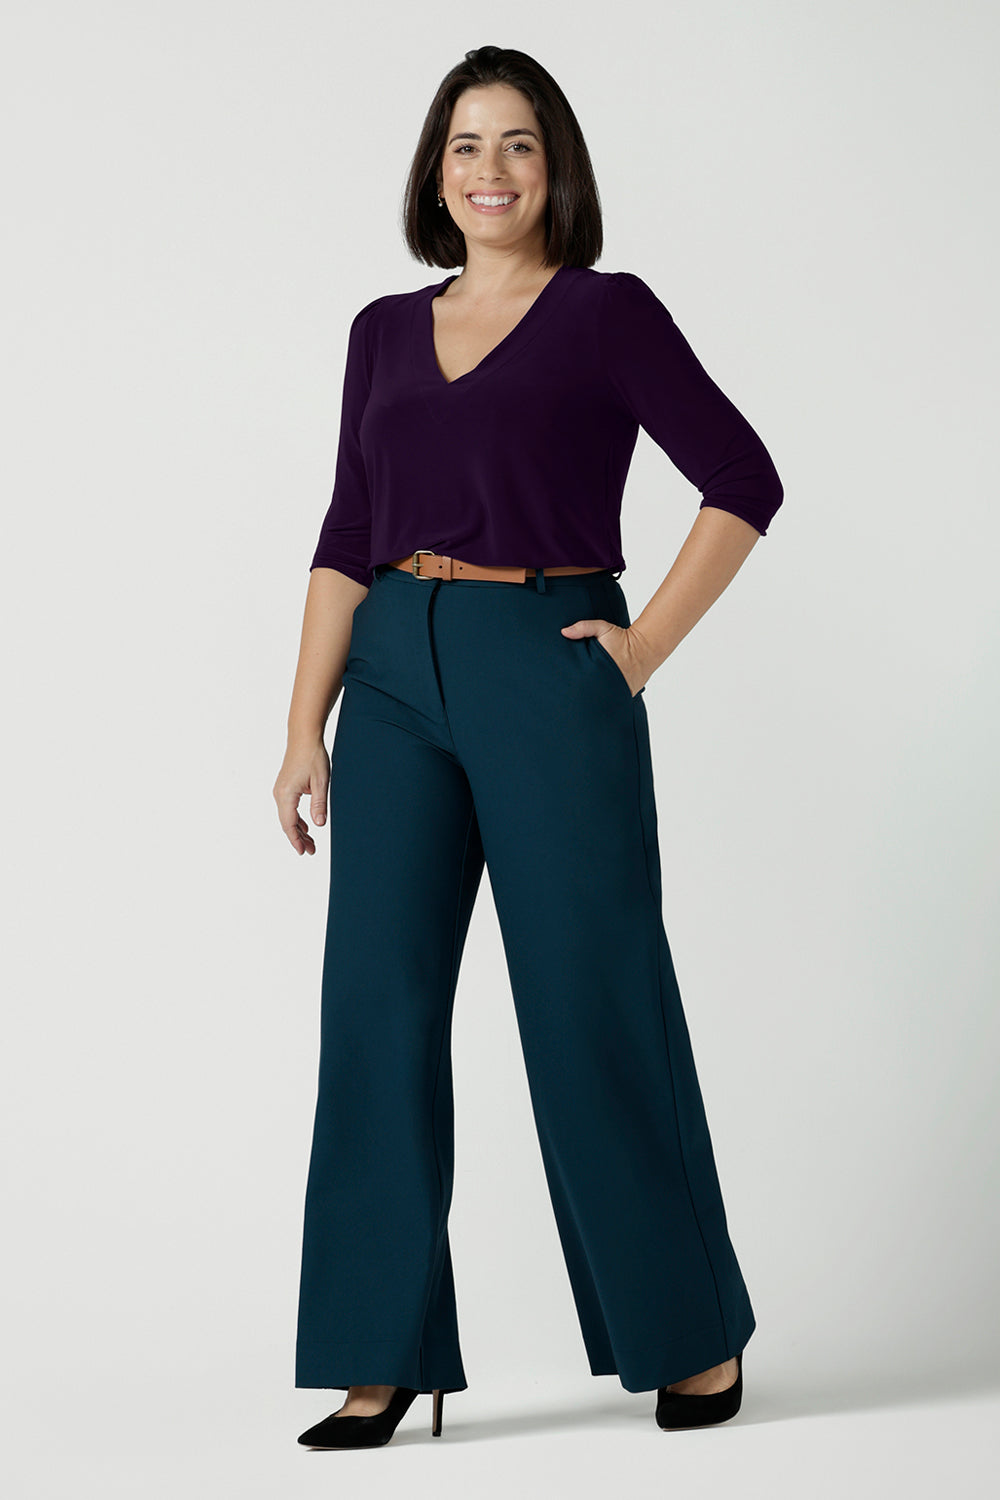 A size 10 woman wears the Yael pant in Petrol. A high waist tailored pant with tailoring elements like side pockets, zip front and belt loops. Full length wide leg pant suitable for comfortable workwear with a statement Petrol colour. Styled back with Vida top in Amethyst. Made in Australia for women size 8 - 24.